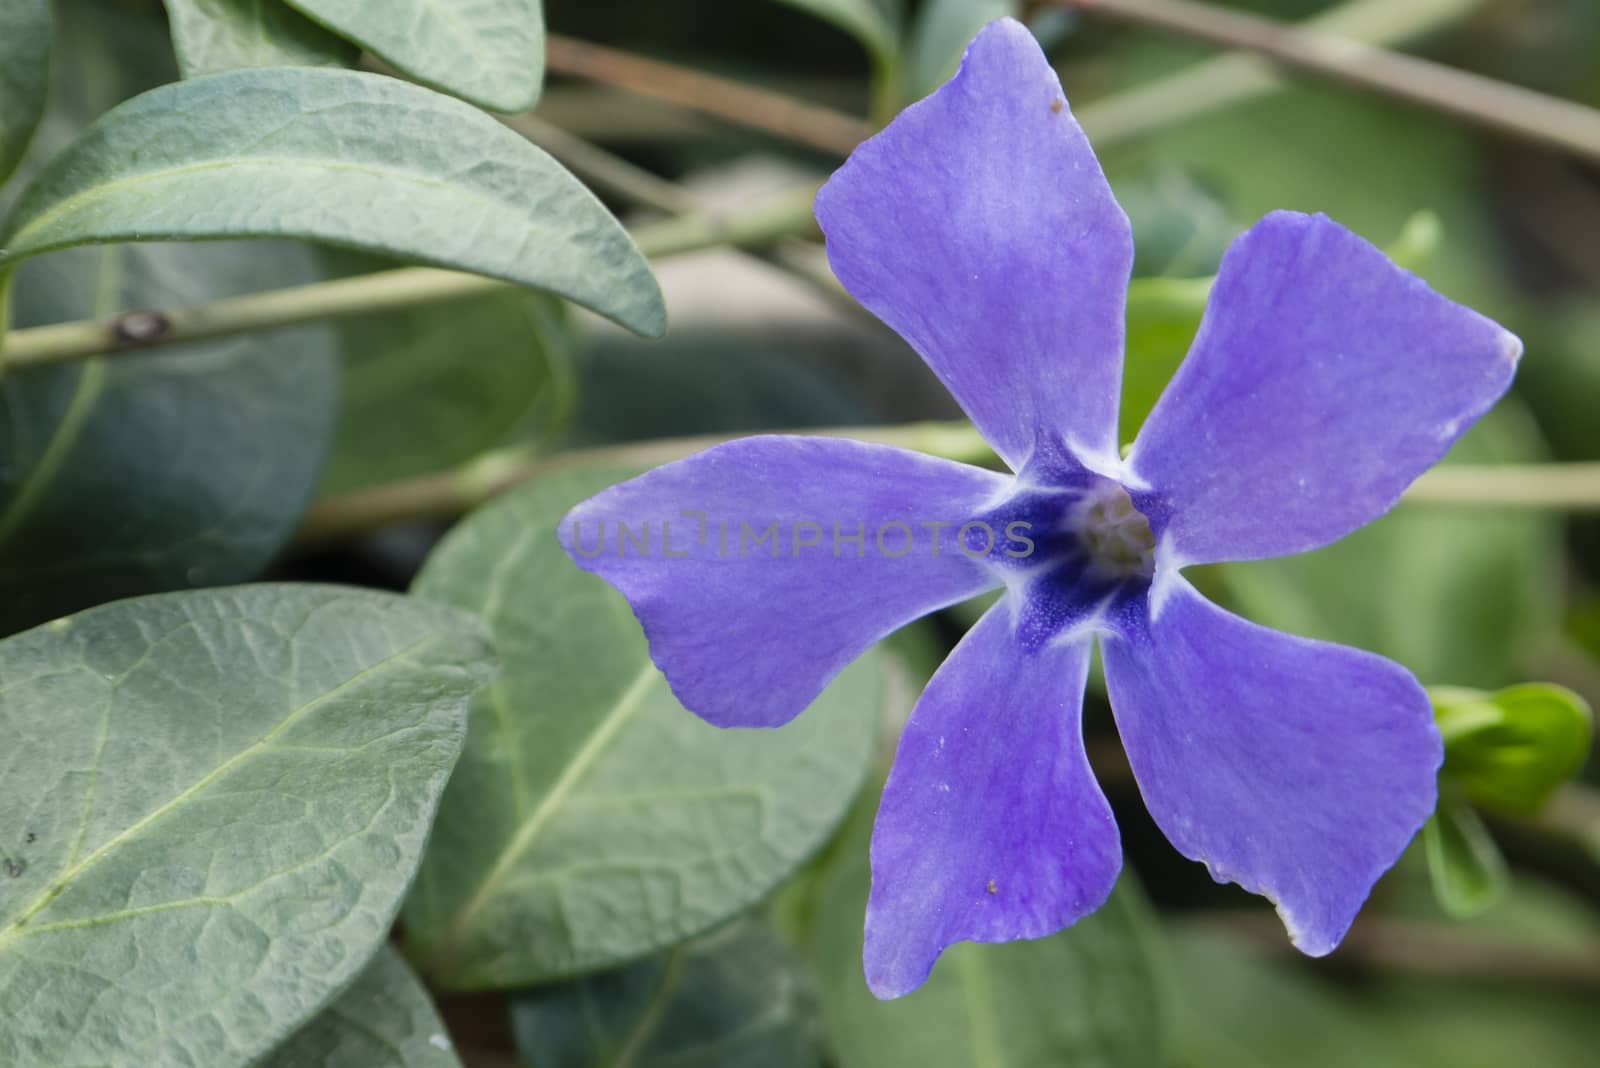 Periwinkle, Vinca flower, genus of flowering plants in the family Apocynaceae, native to Europe, northwest Africa and southwest Asia